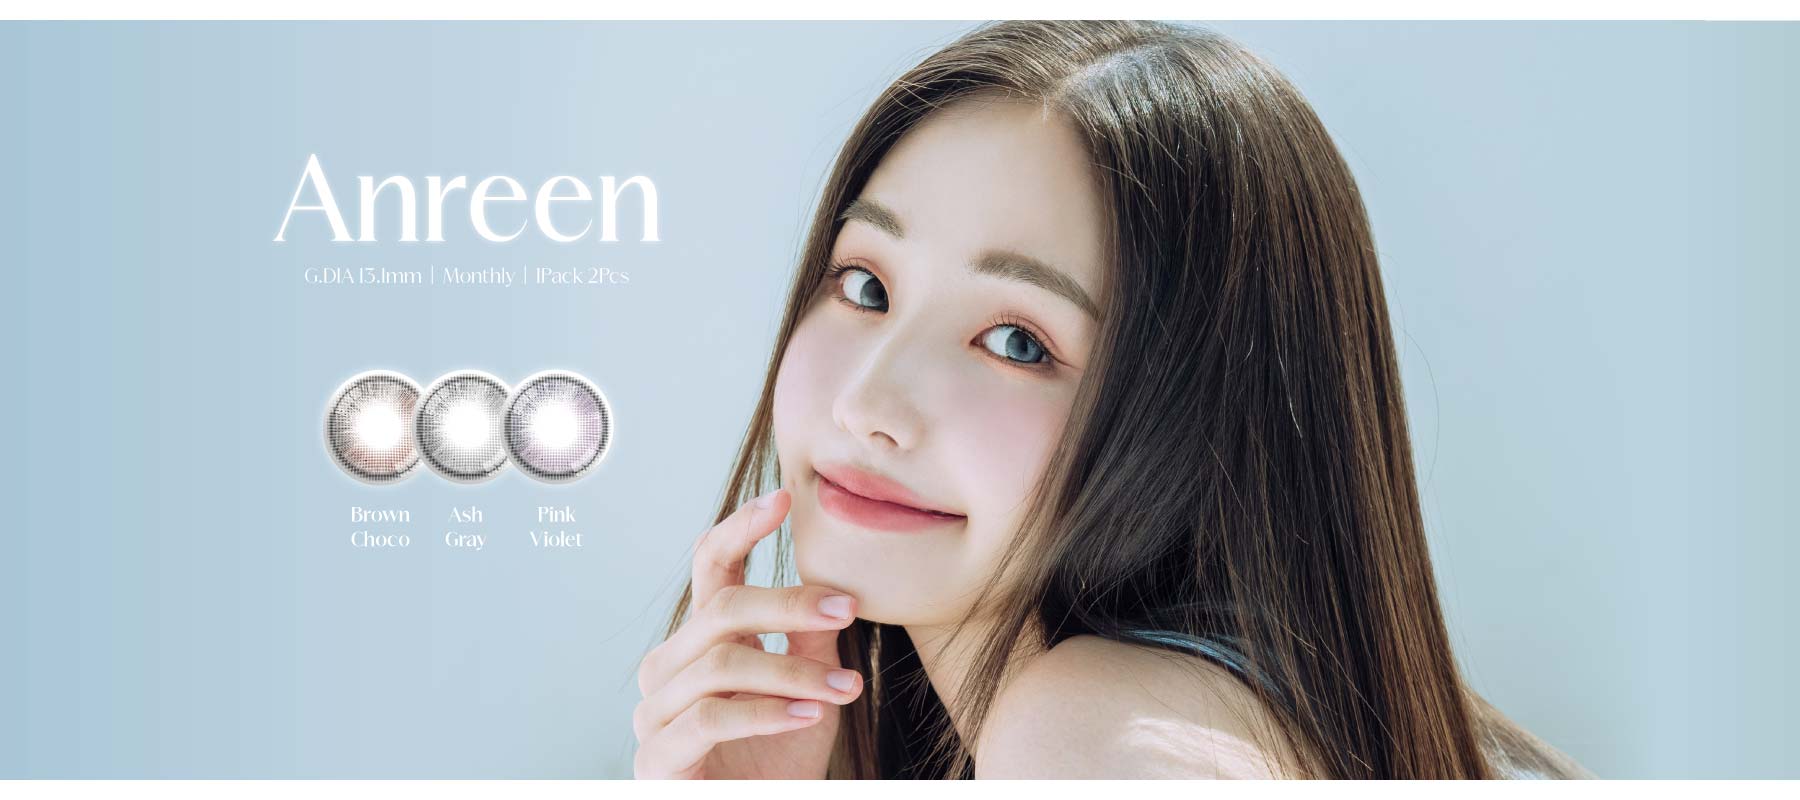 Lensvery-Anreen-Colored-Contacts-Banner